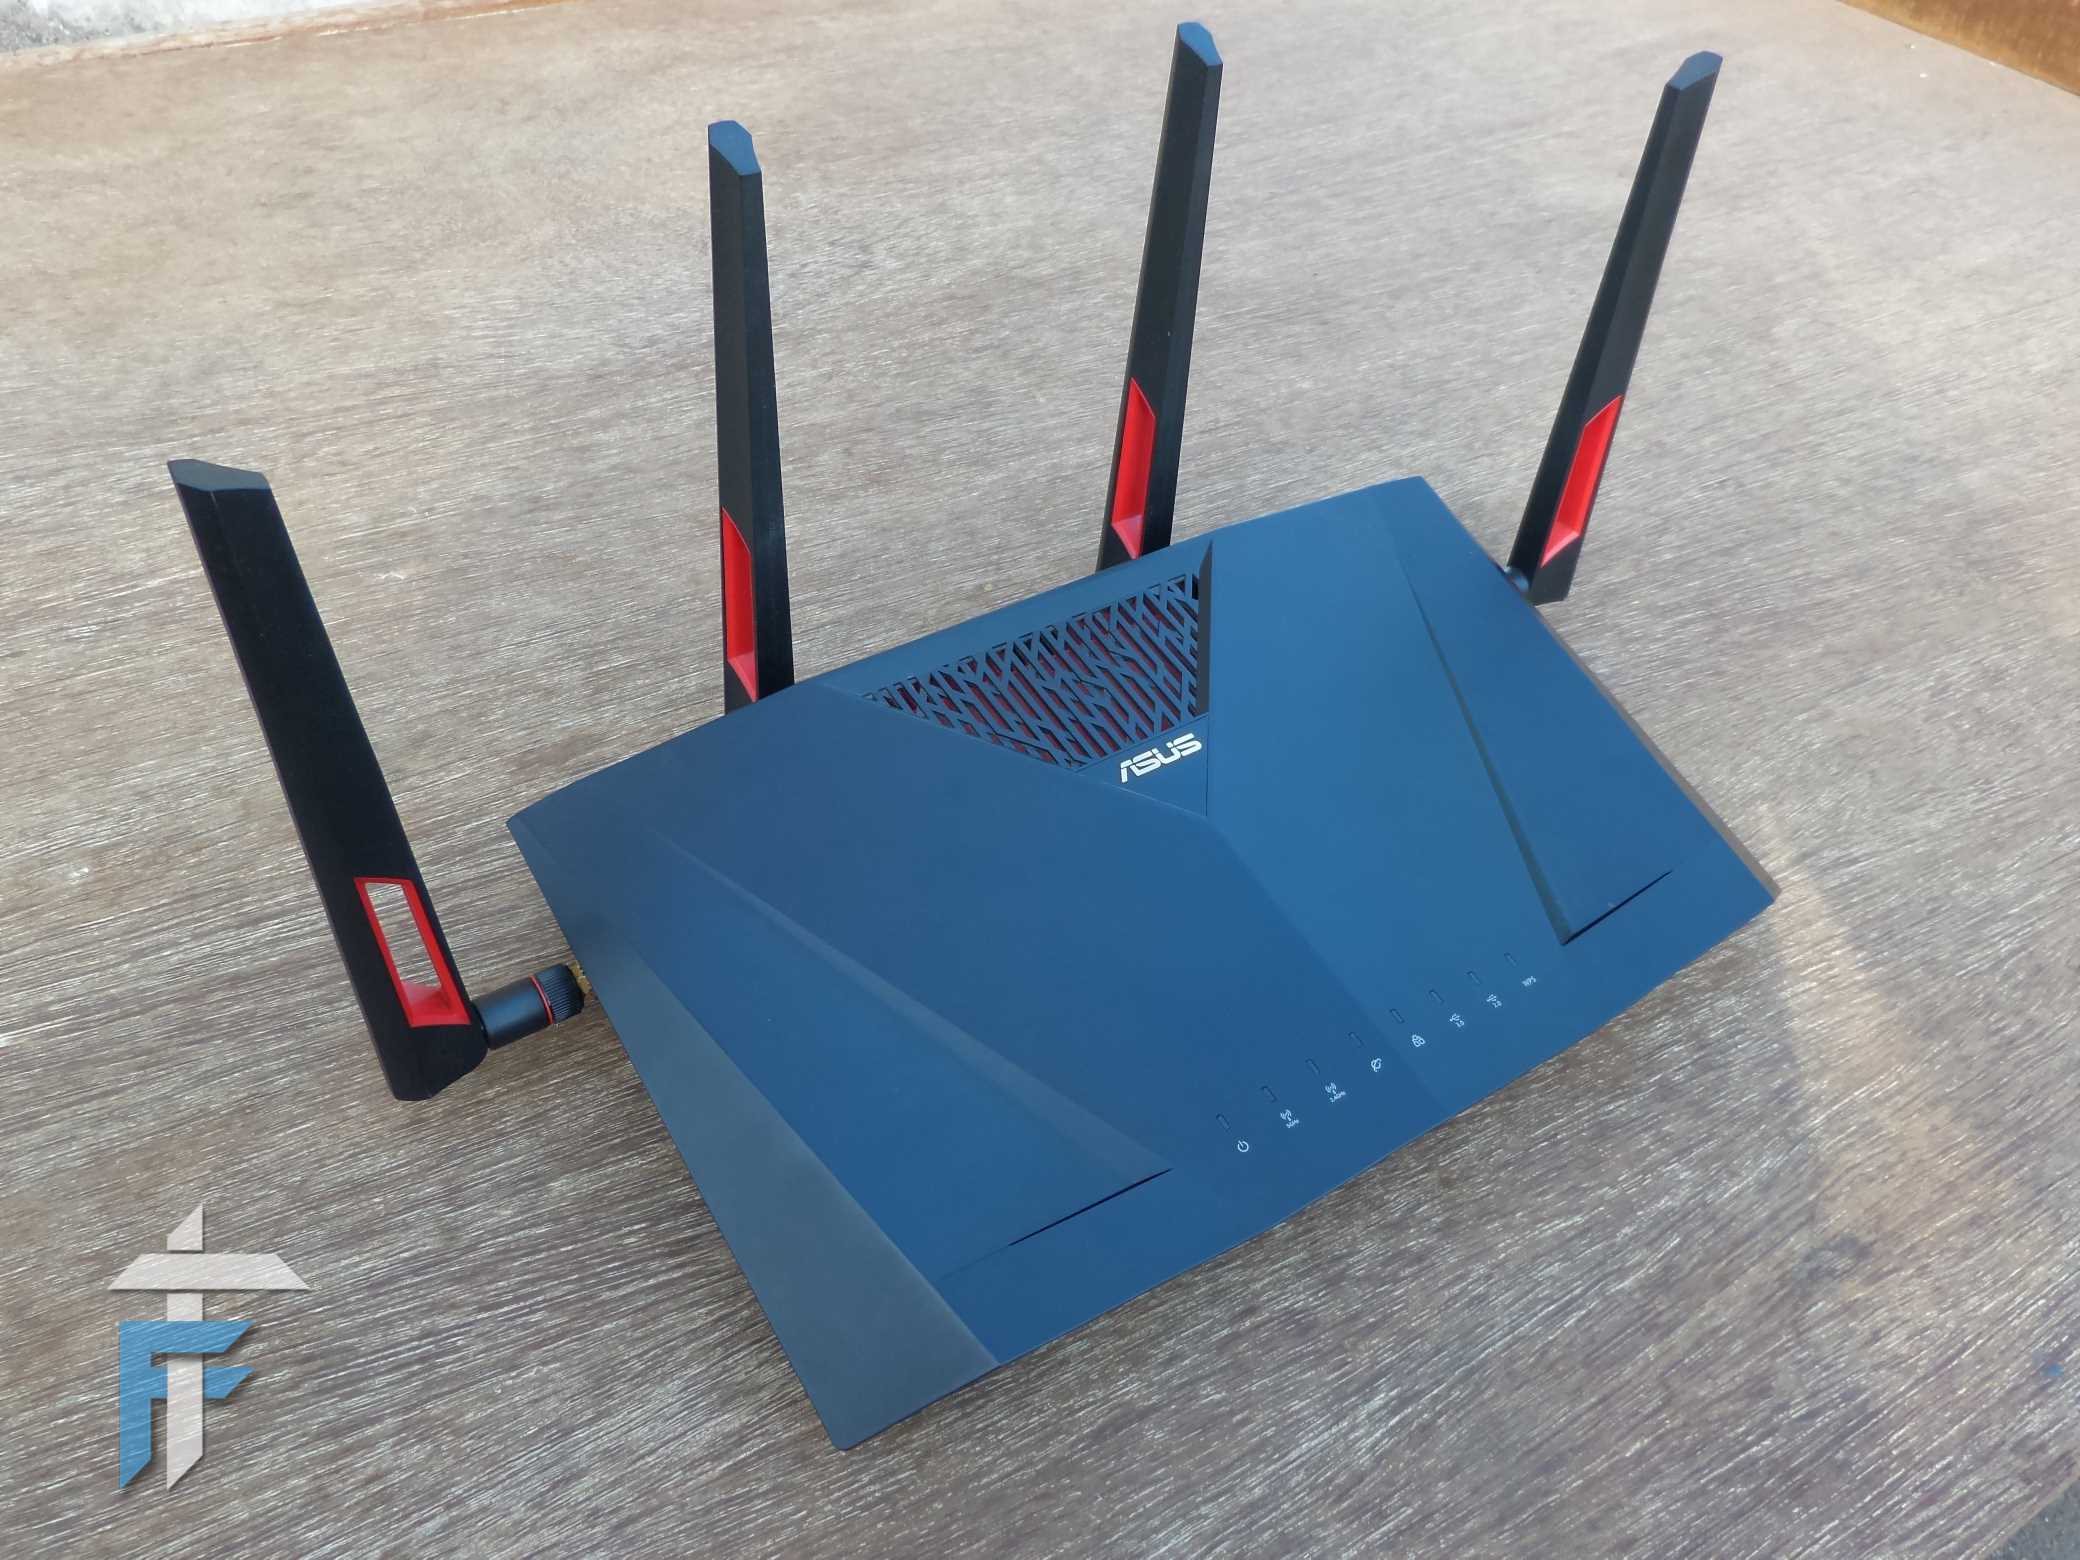 ASUS RT-AC88U router specifications and review